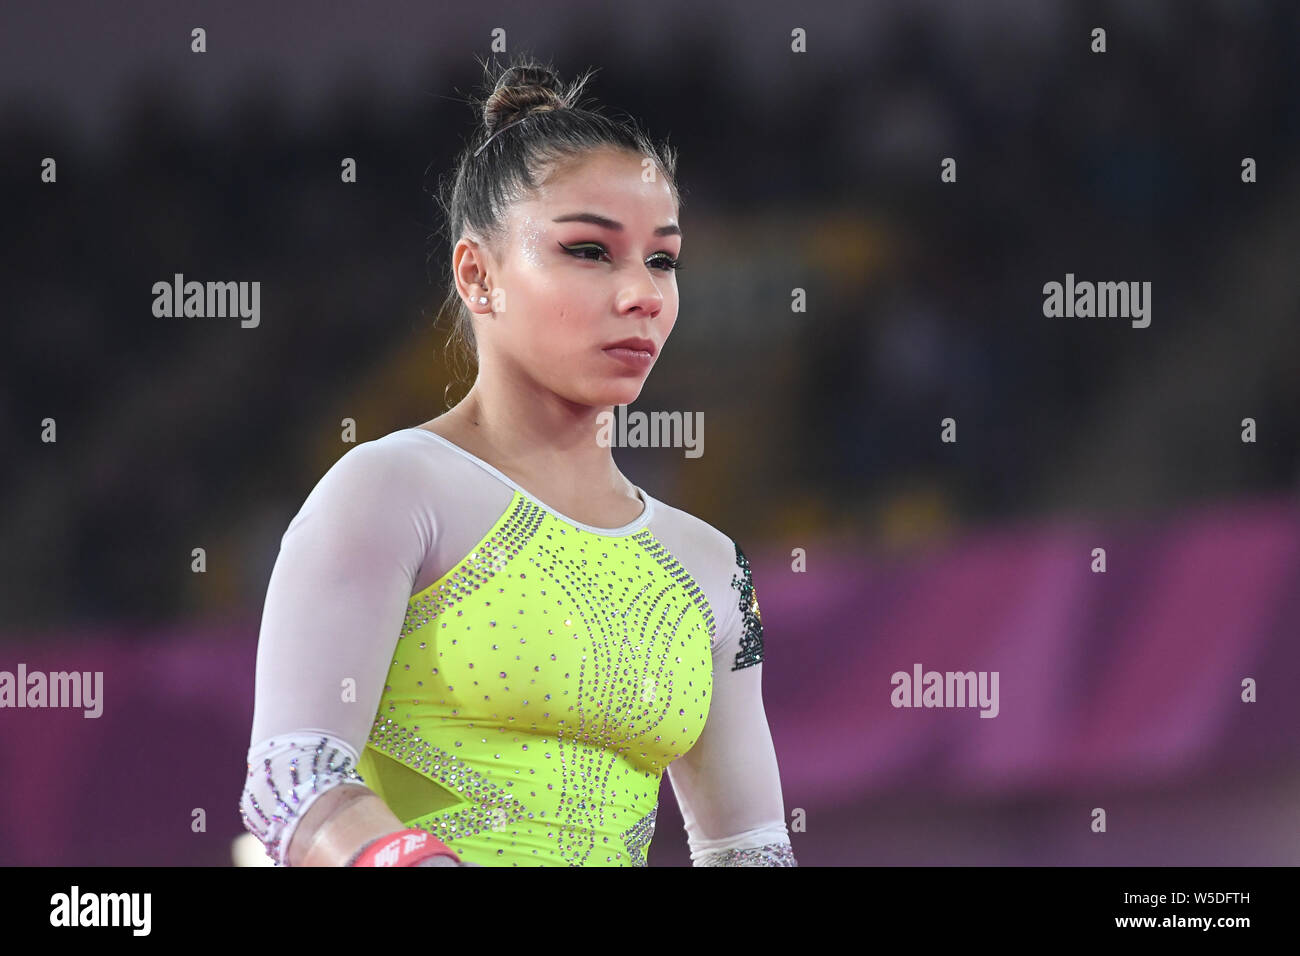 July 27, 2019, Lima, Peru: FLAVIA SARAIVA from Brazil concentrates before her uneven bars routine during the team finals competition held in the Polideportivo Villa El Salvador  in Lima, Peru. (Credit Image: © Amy Sanderson/ZUMA Wire) Stock Photo